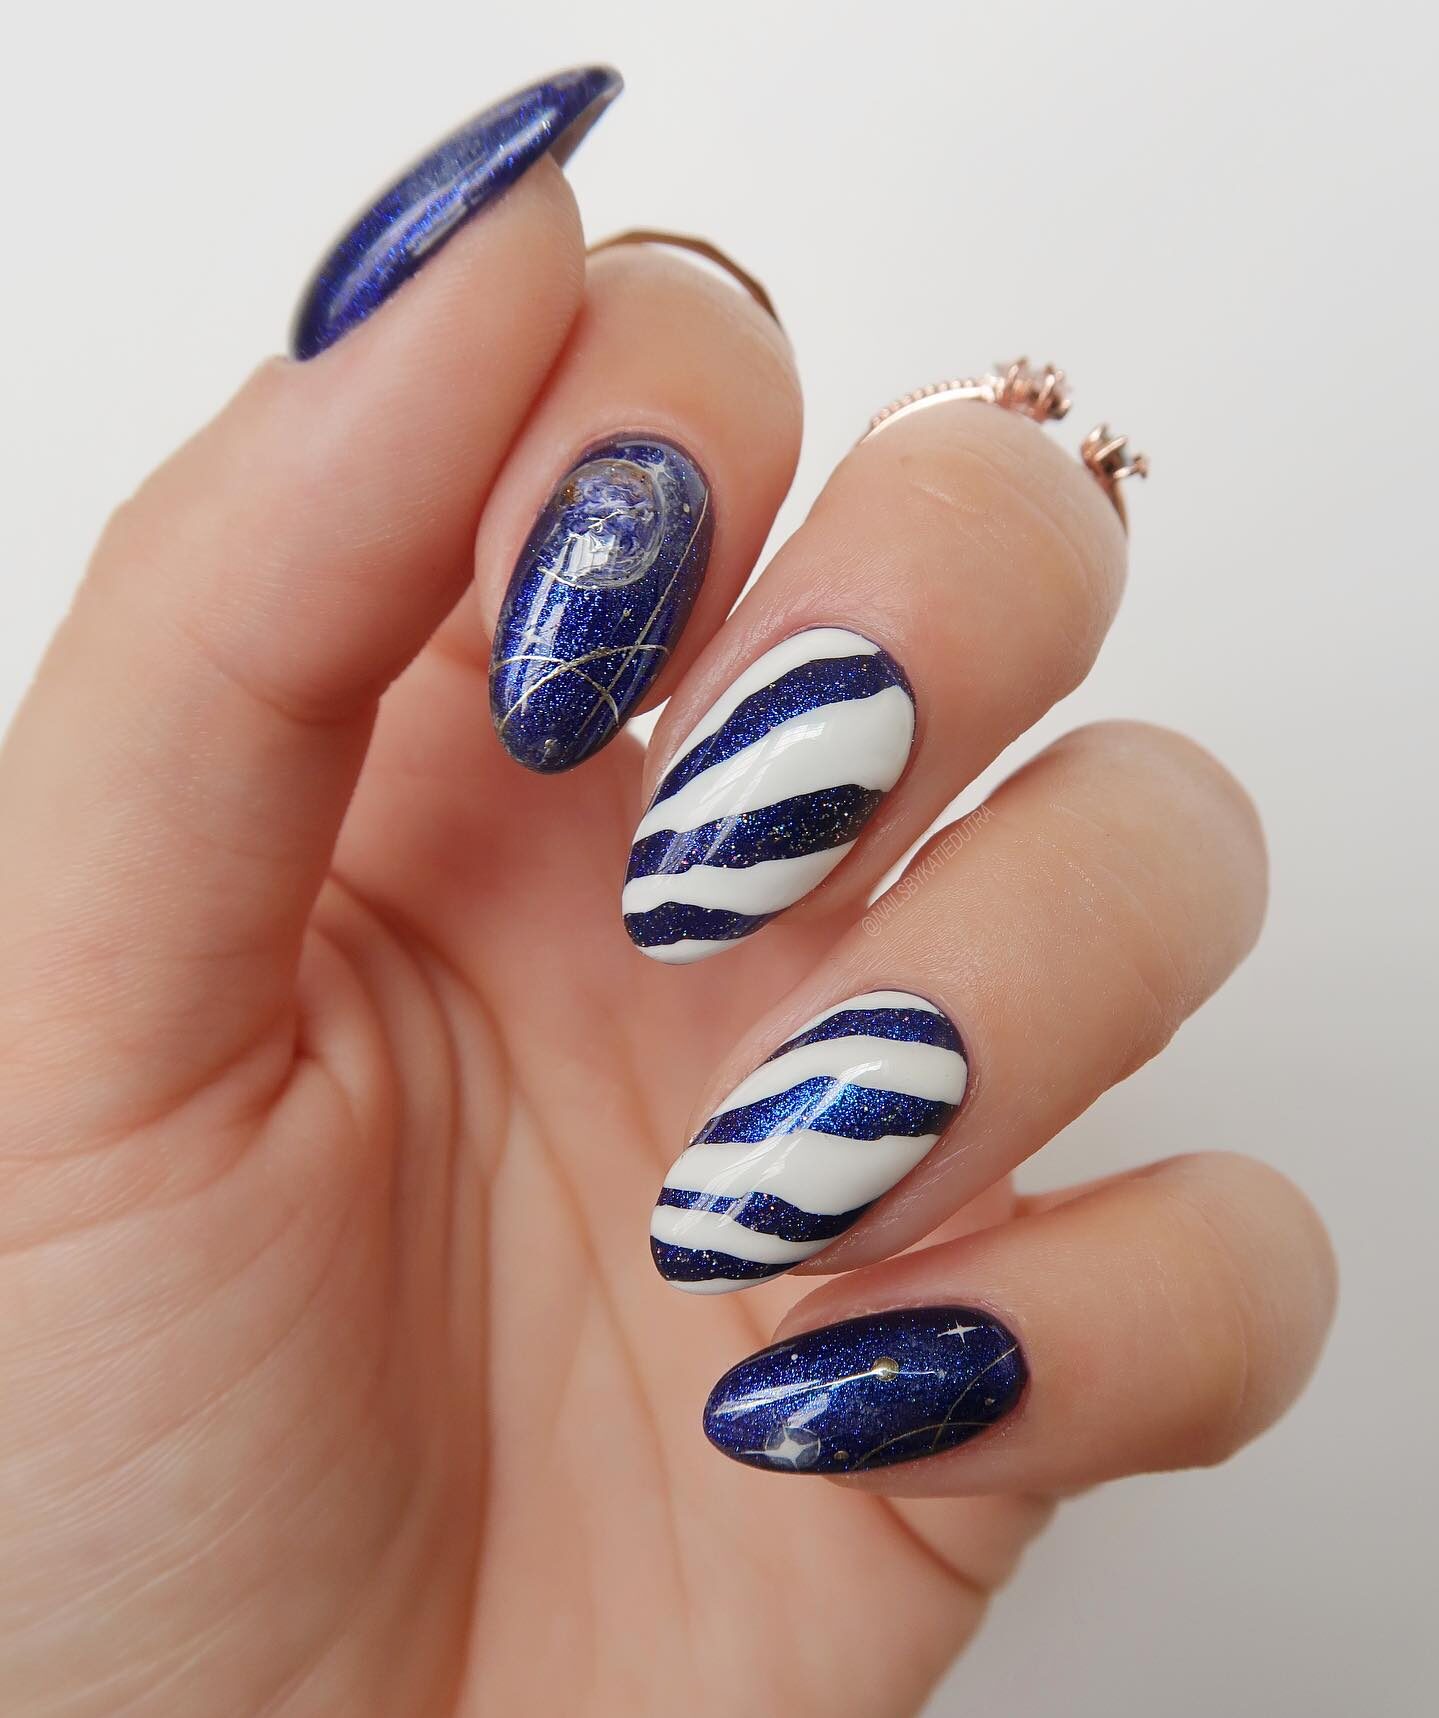 Blue and white nail colors with galaxy-themed nail art on medium round nails